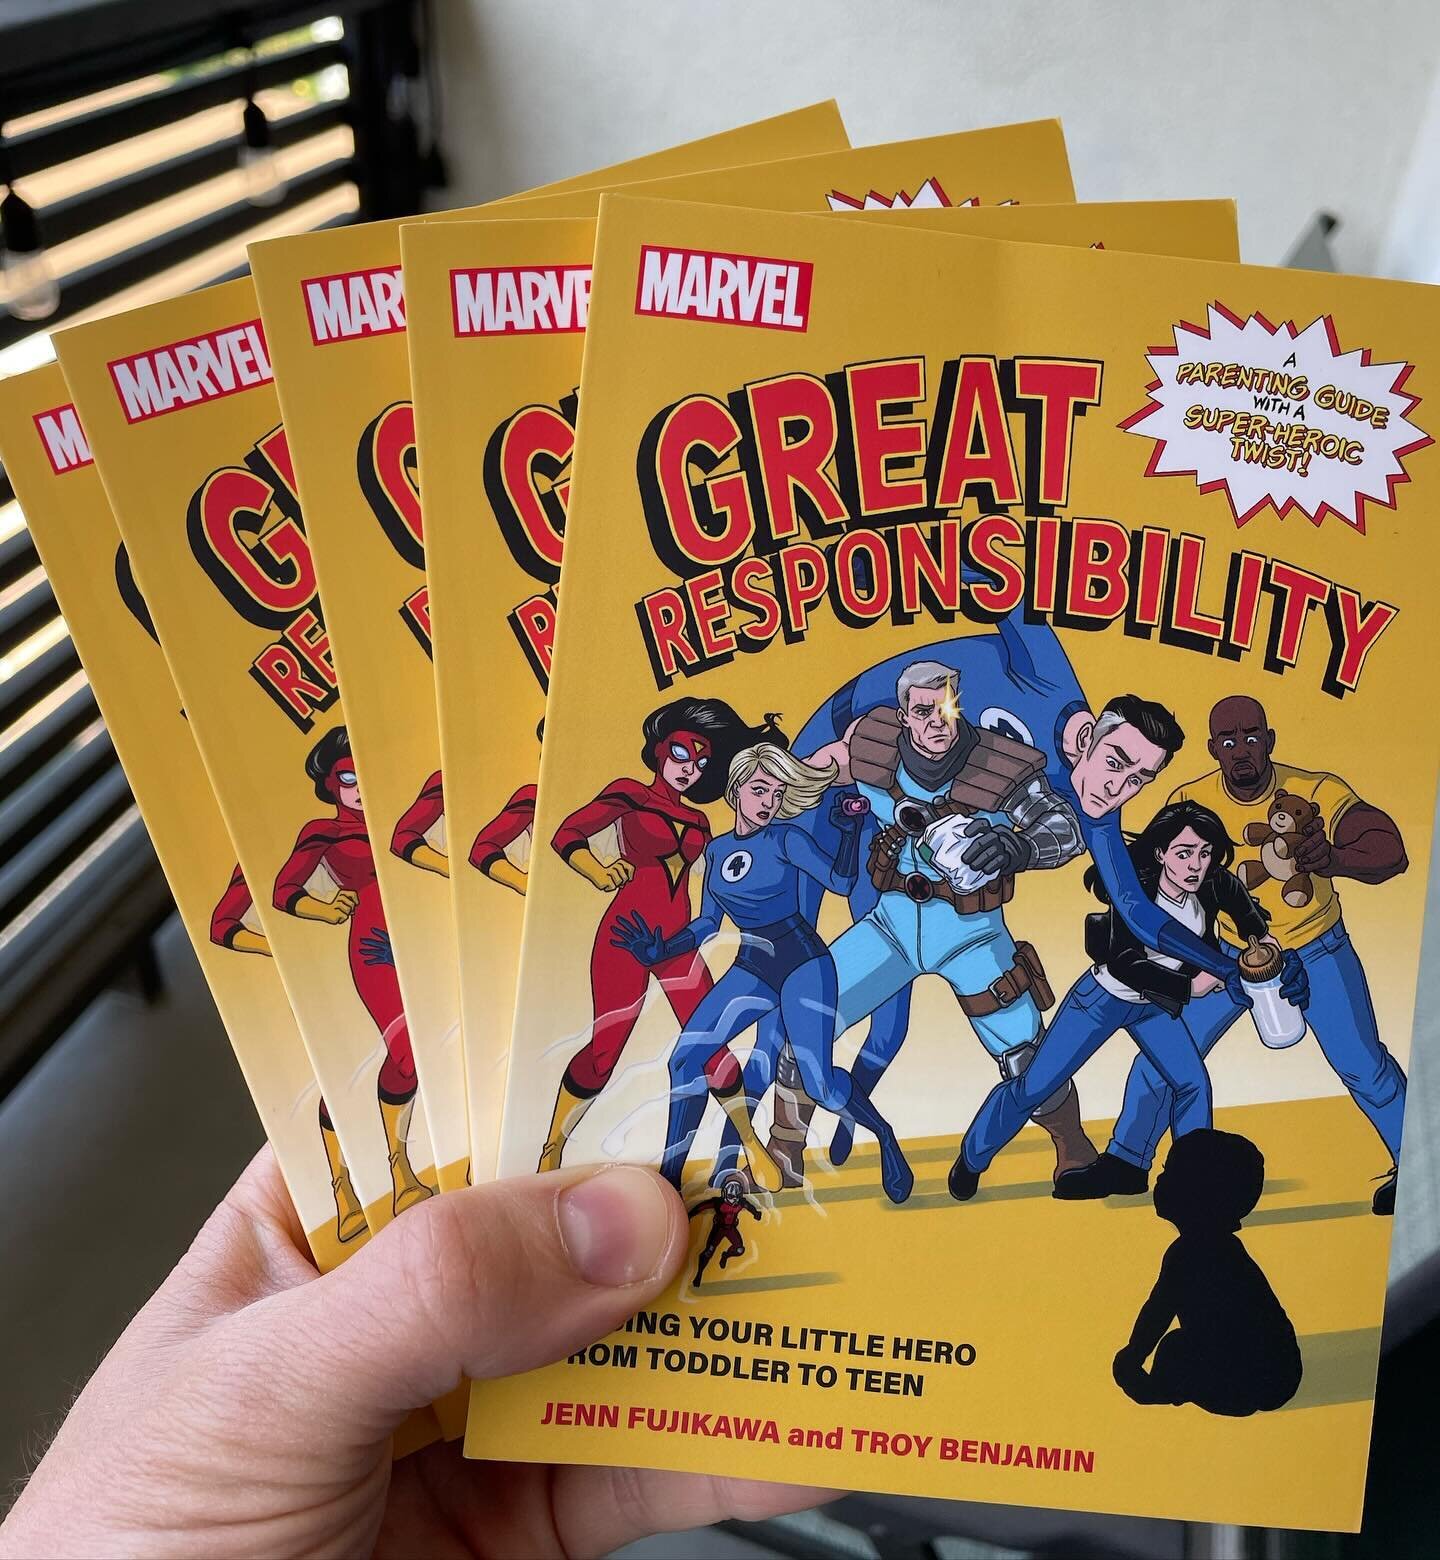 Mail-call today with that new book feeling&hellip; Great Responsibility is coming your way soon! Pre-order on Amazon or your favorite book seller today!